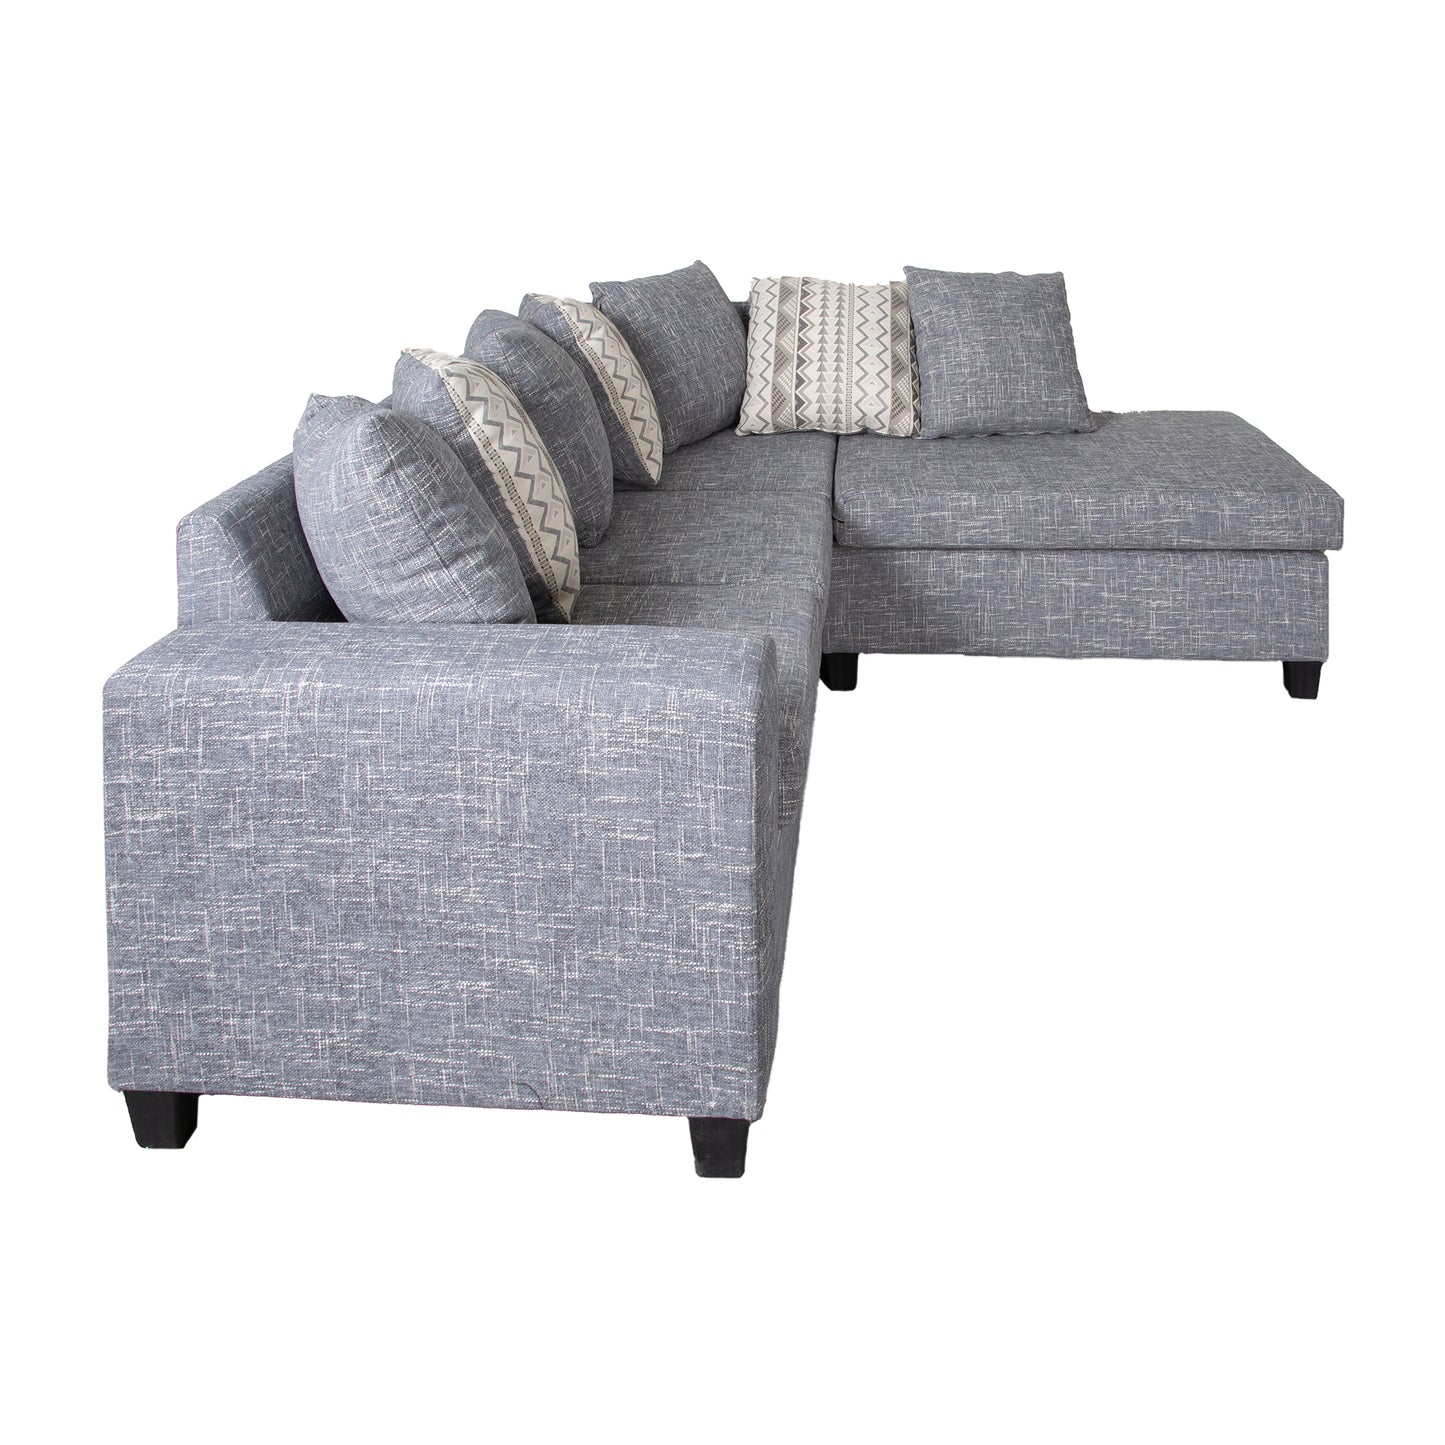 Bella 3 Seater Chaise